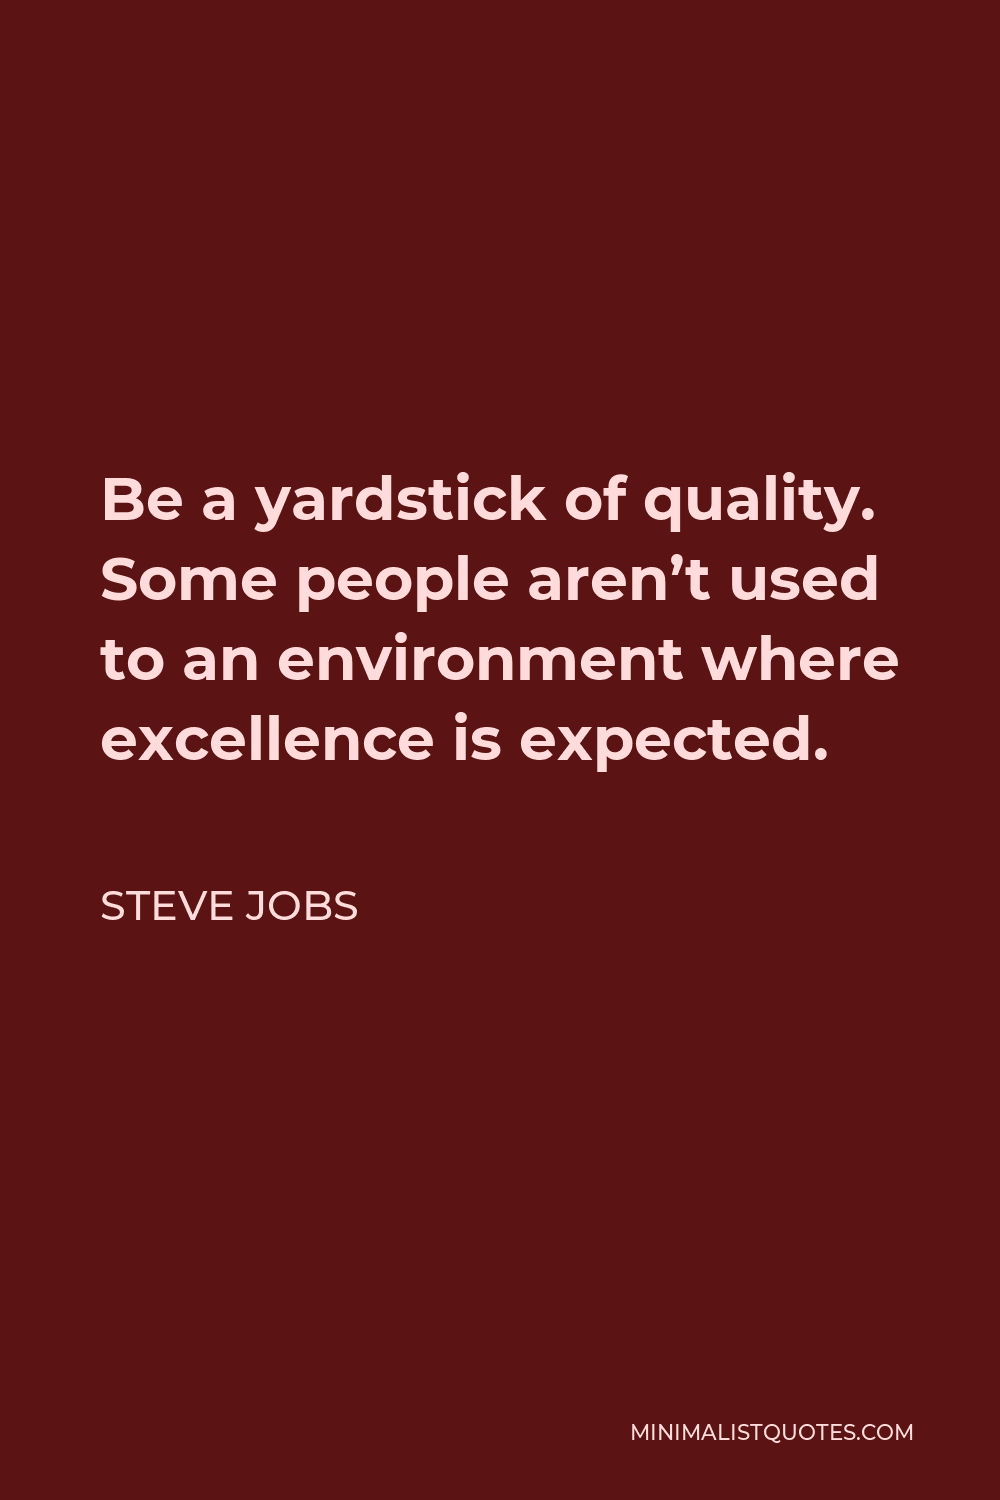 Steve Jobs Quote - Be a yardstick of quality. Some people aren’t used to an environment where excellence is expected.